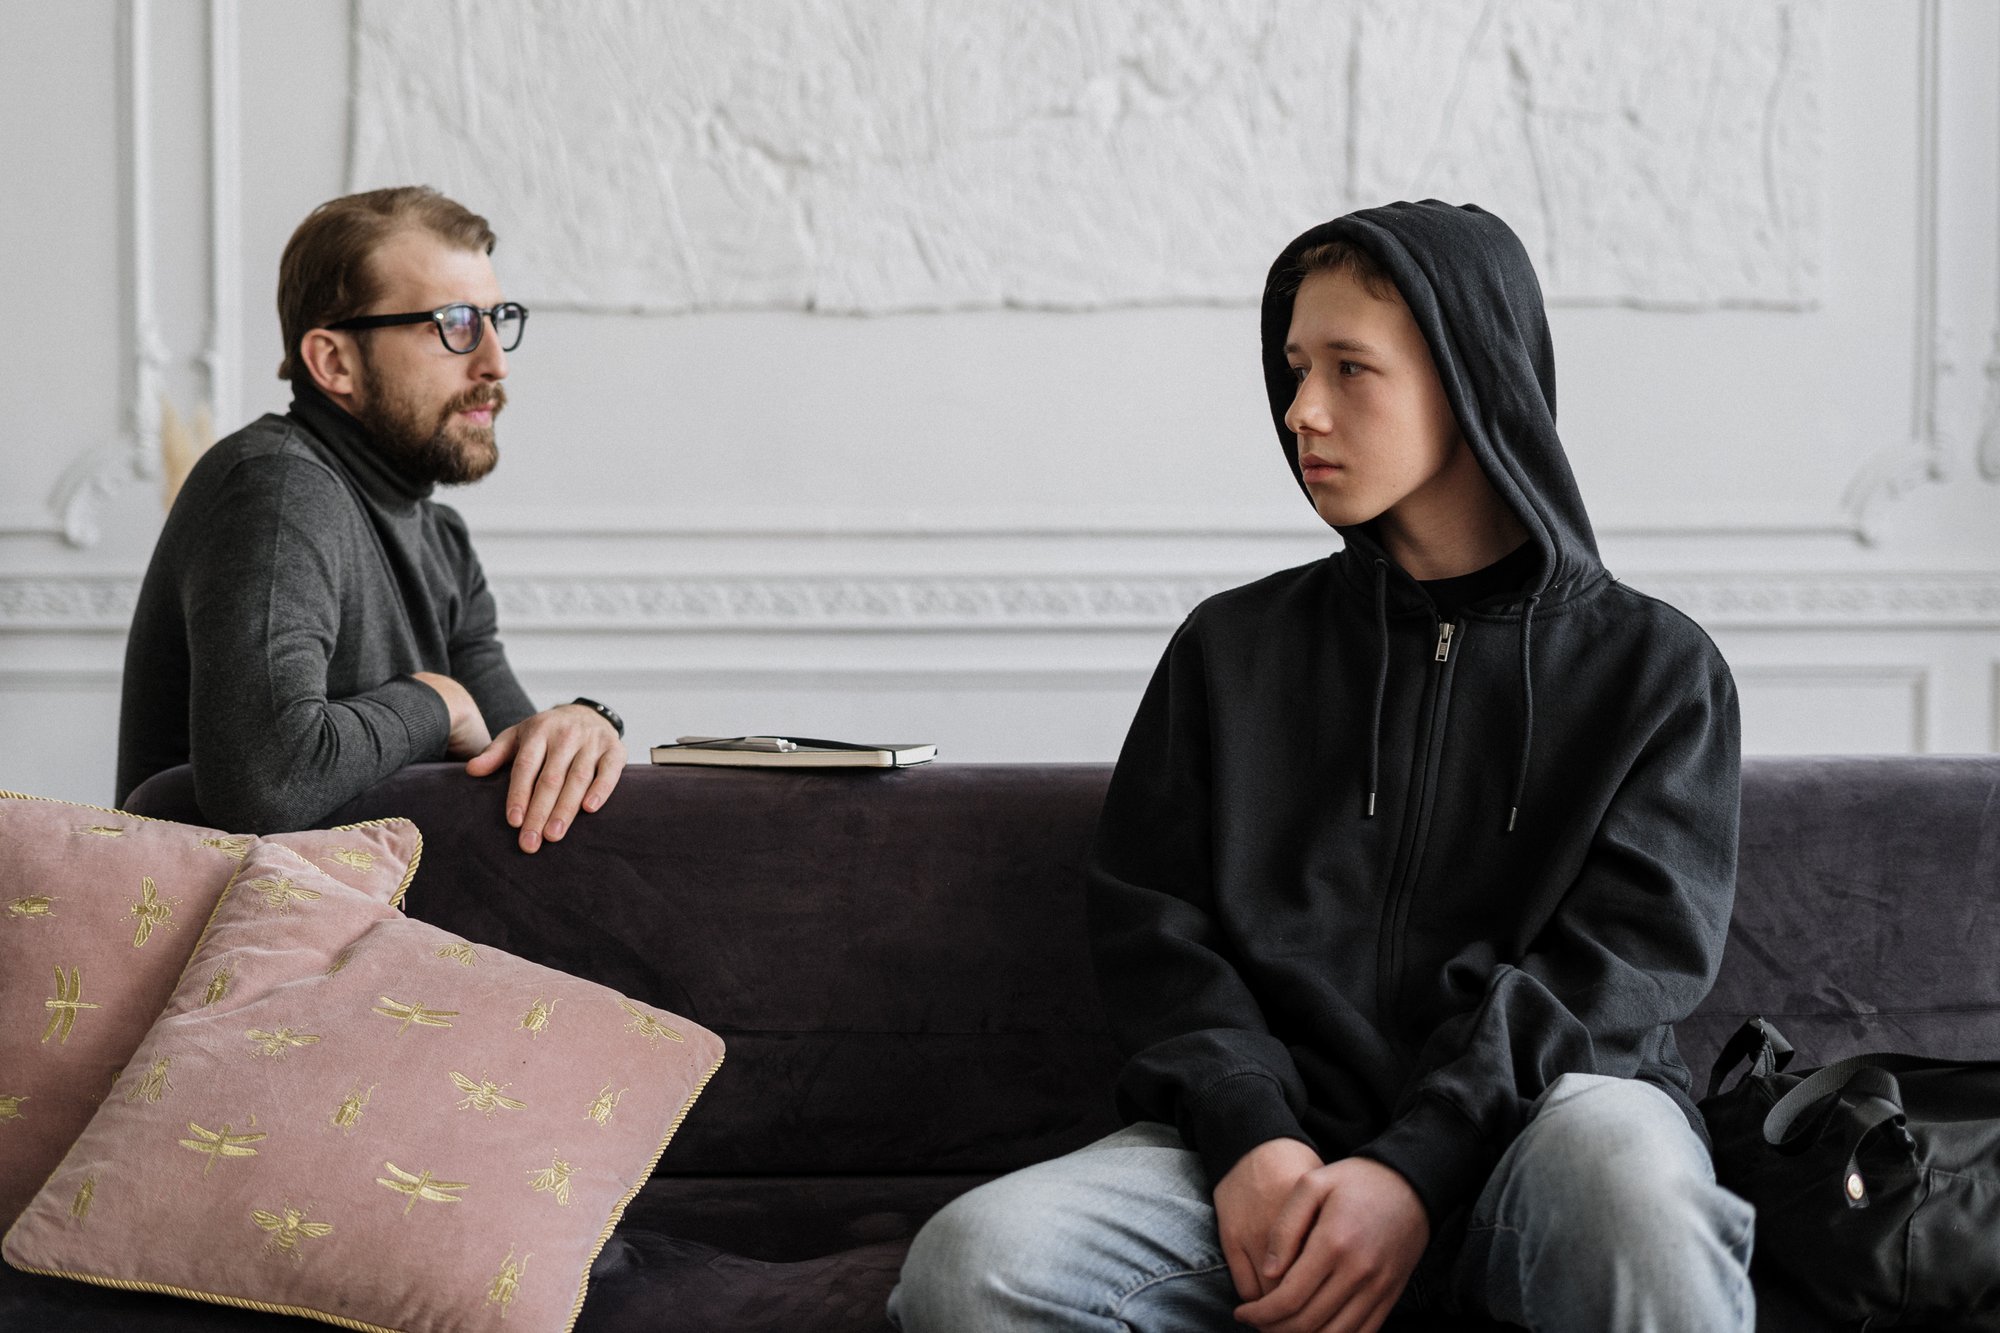 therapy session with a teenager wearing a black hoodie|